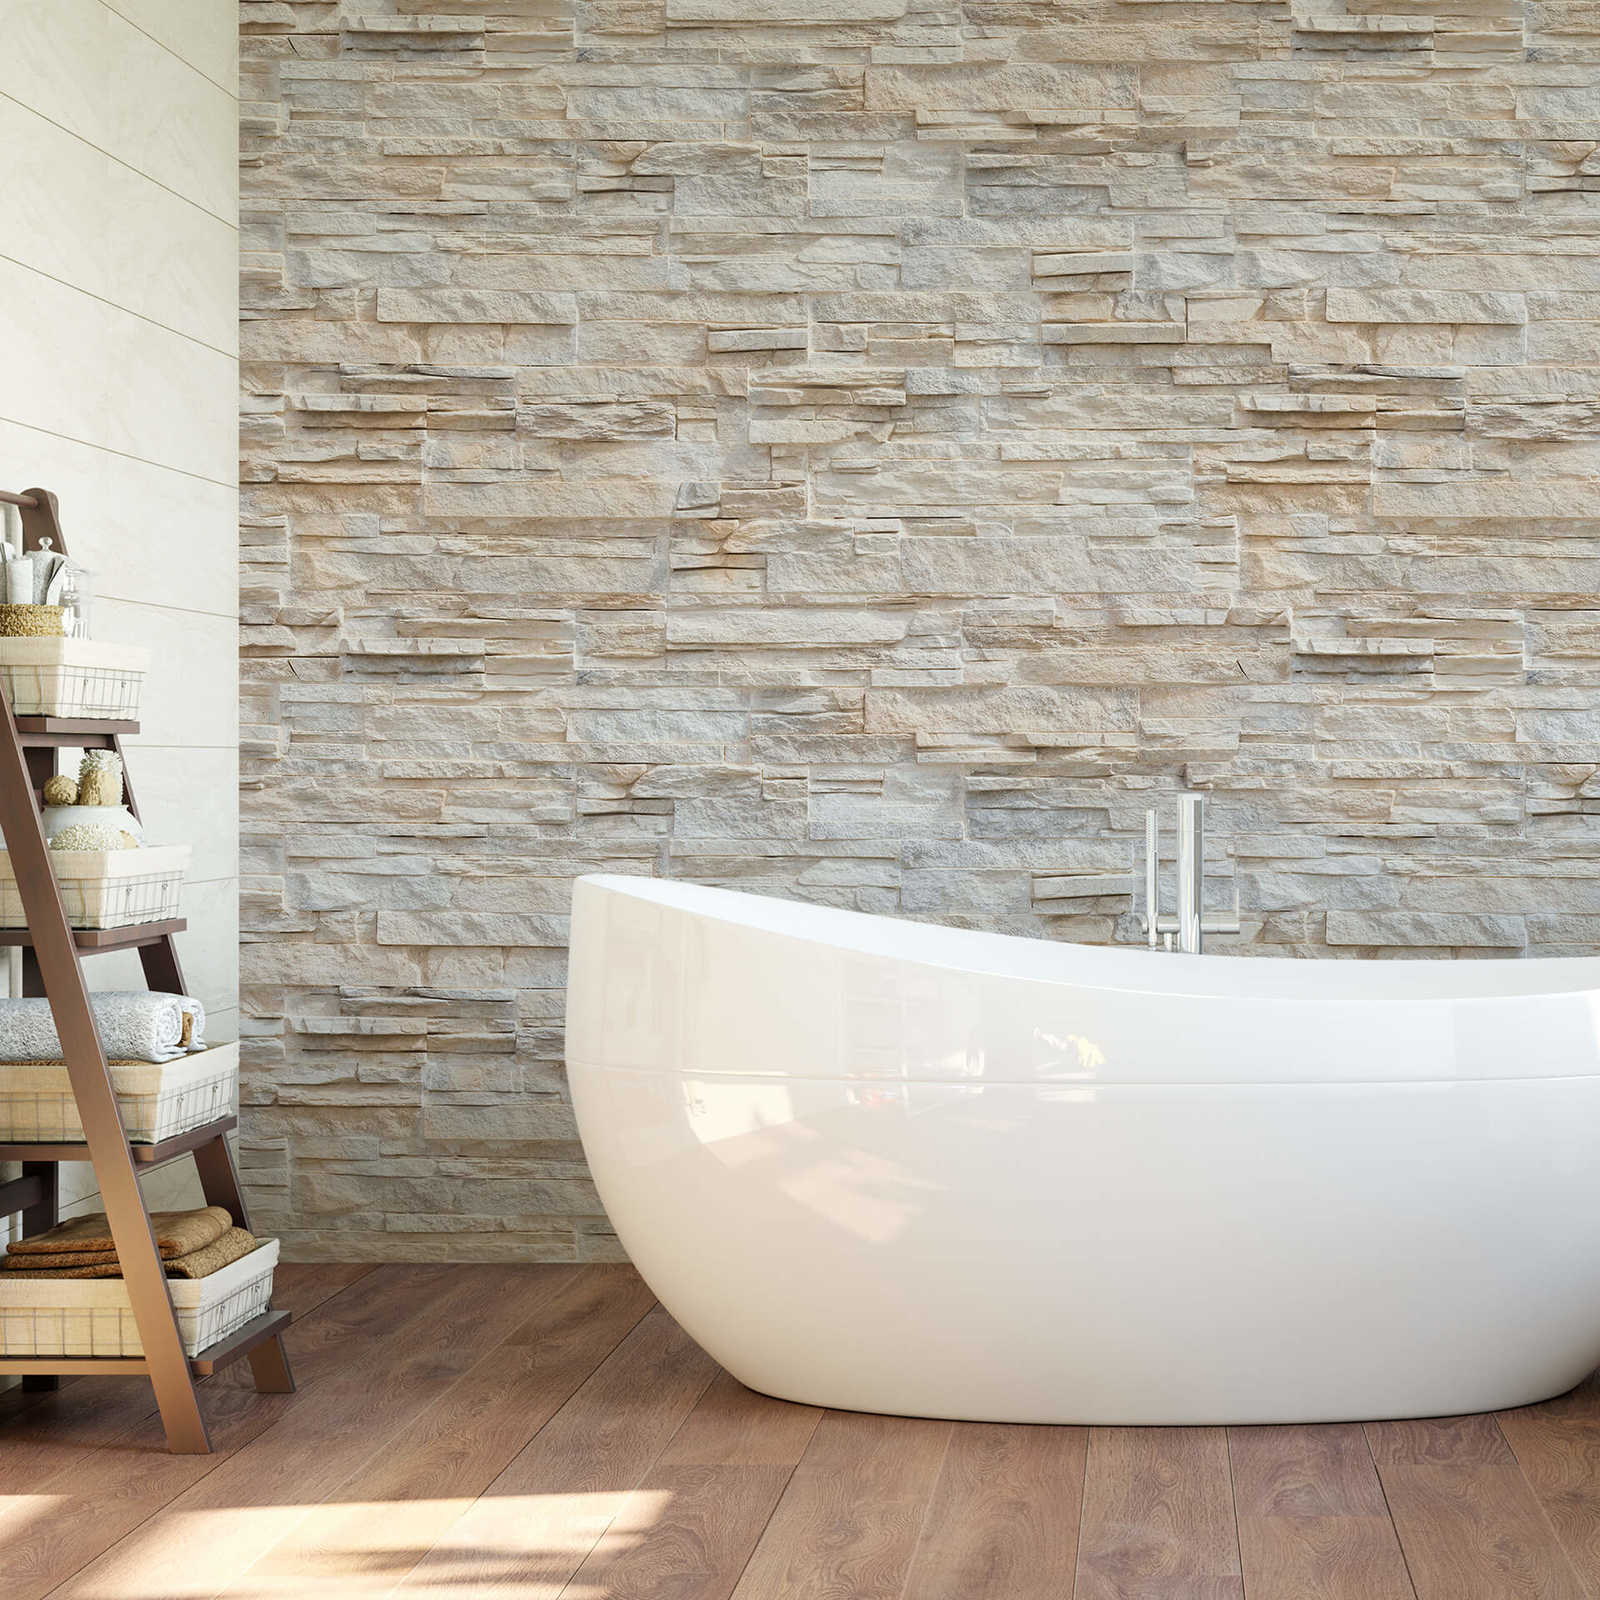             Photo wallpaper natural stone wall with 3D stone look
        